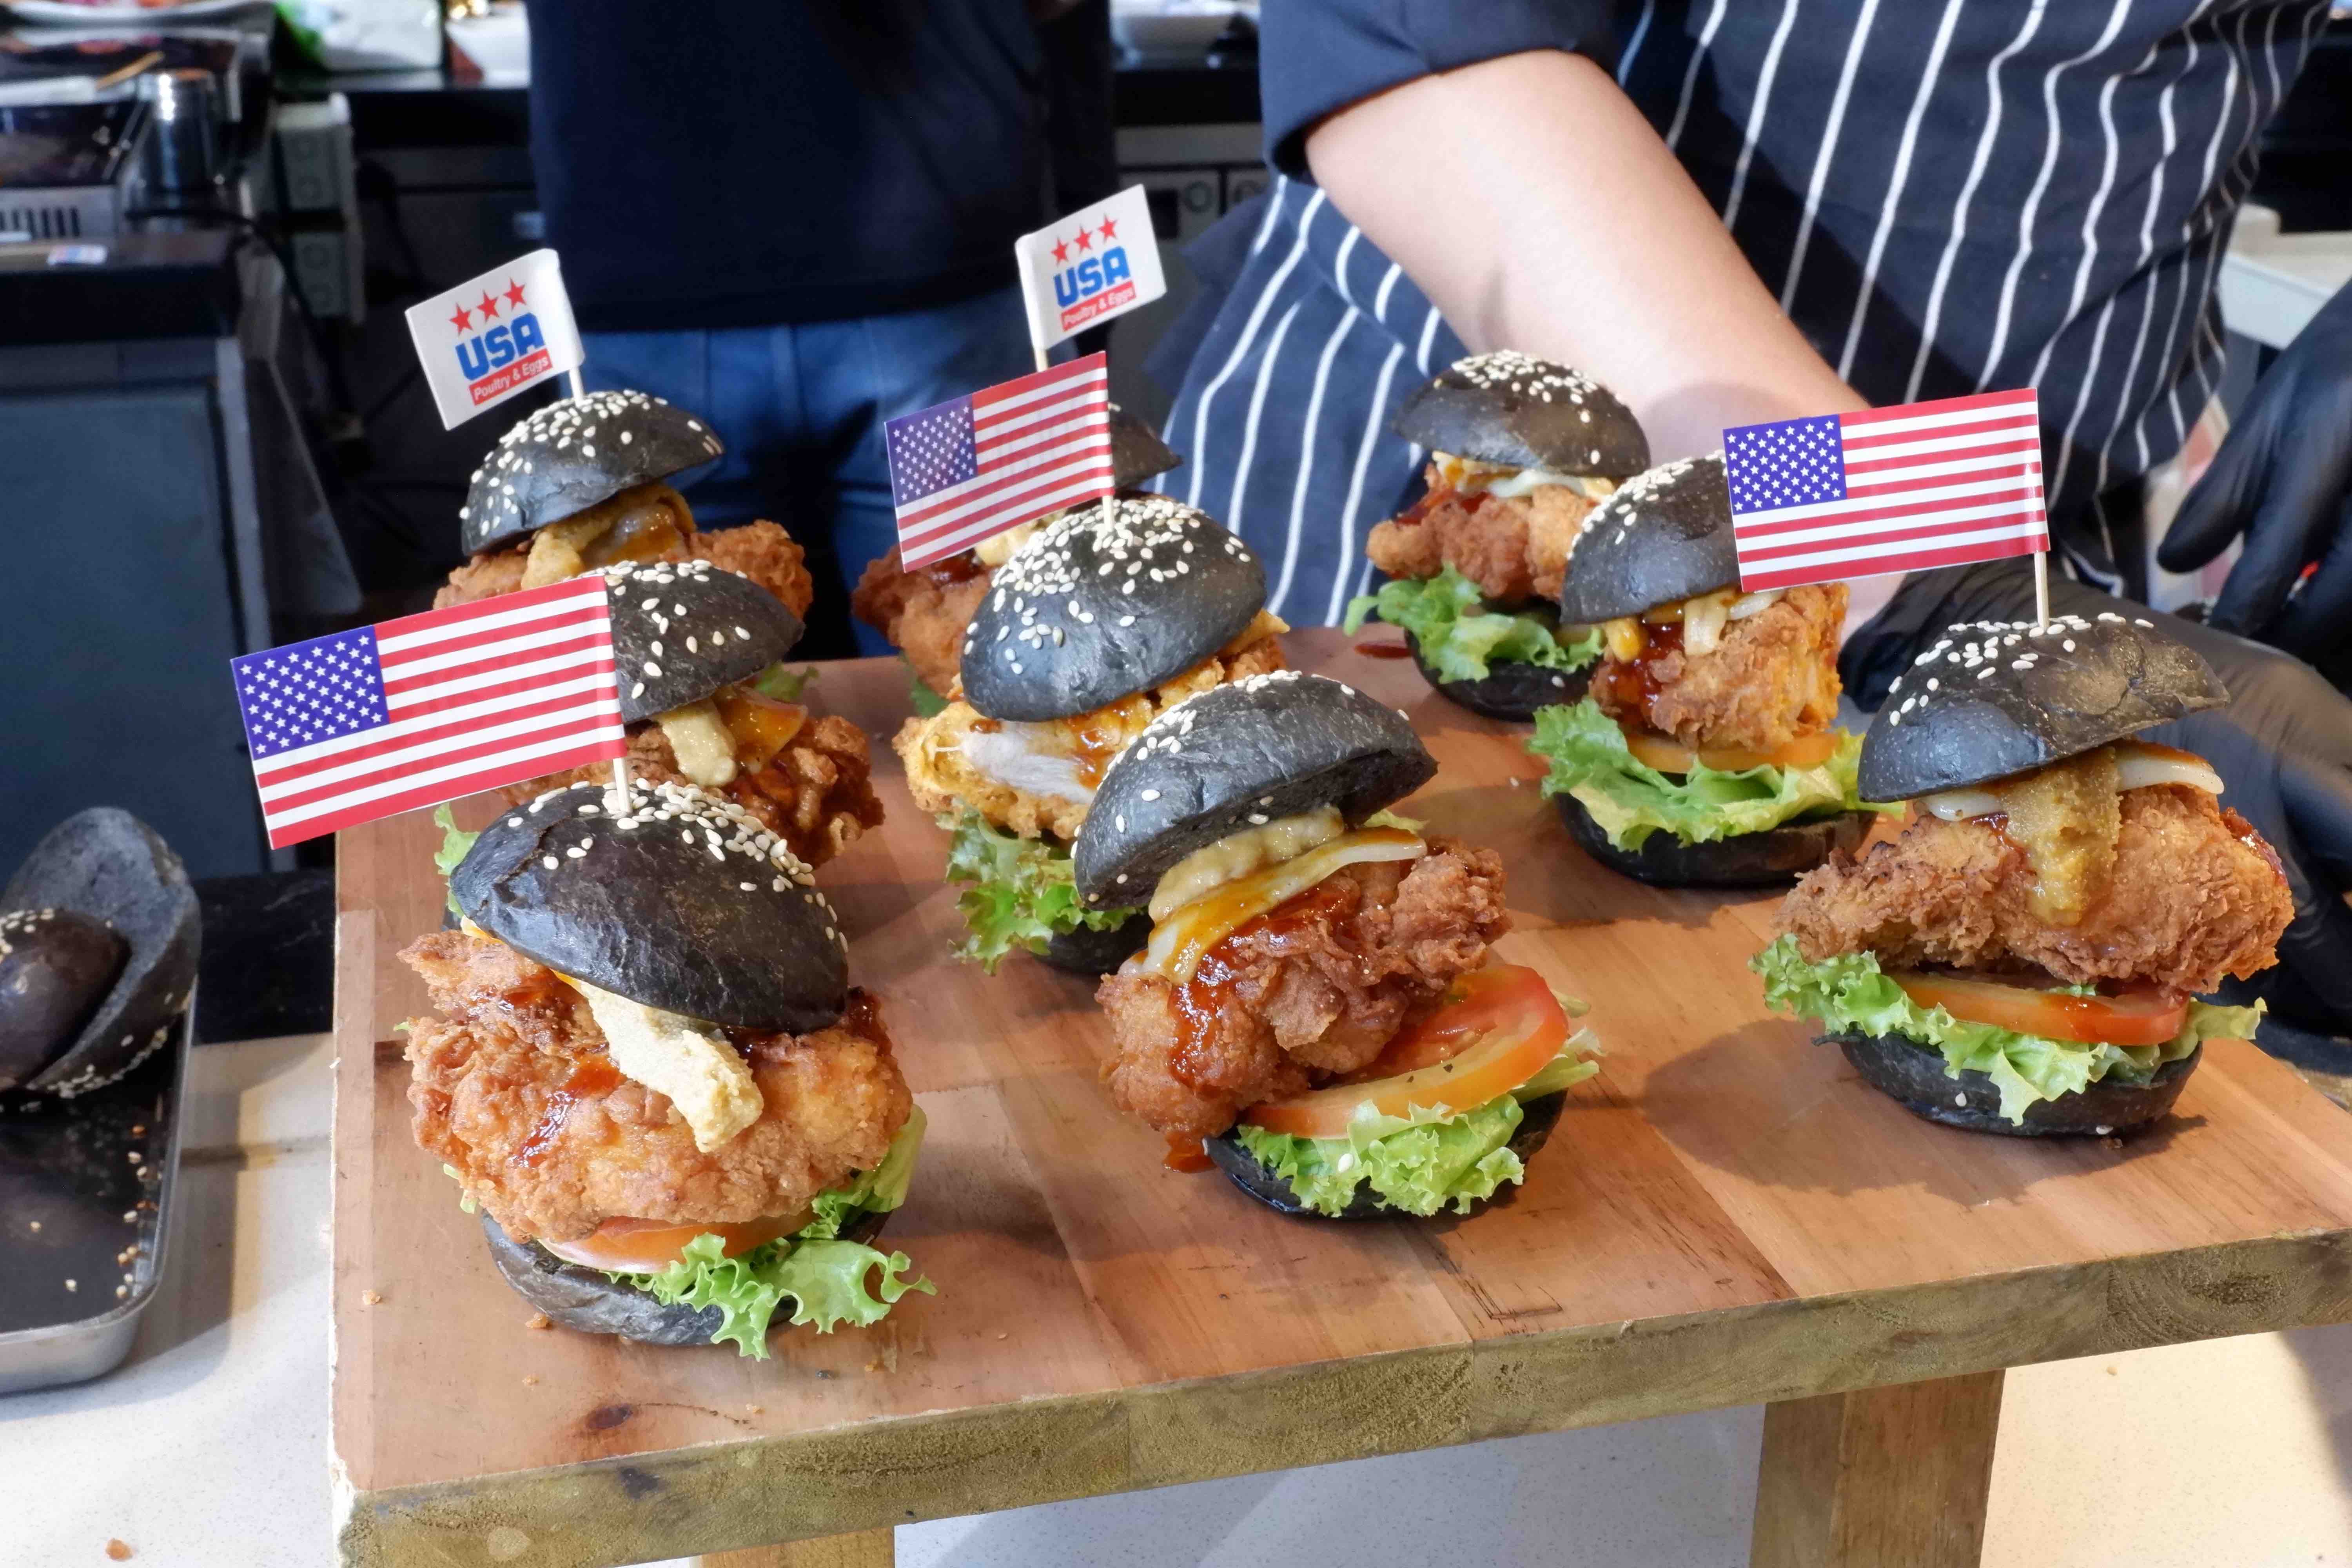 Burger show hits Ho Chi Minh City to promote U.S. agricultural products